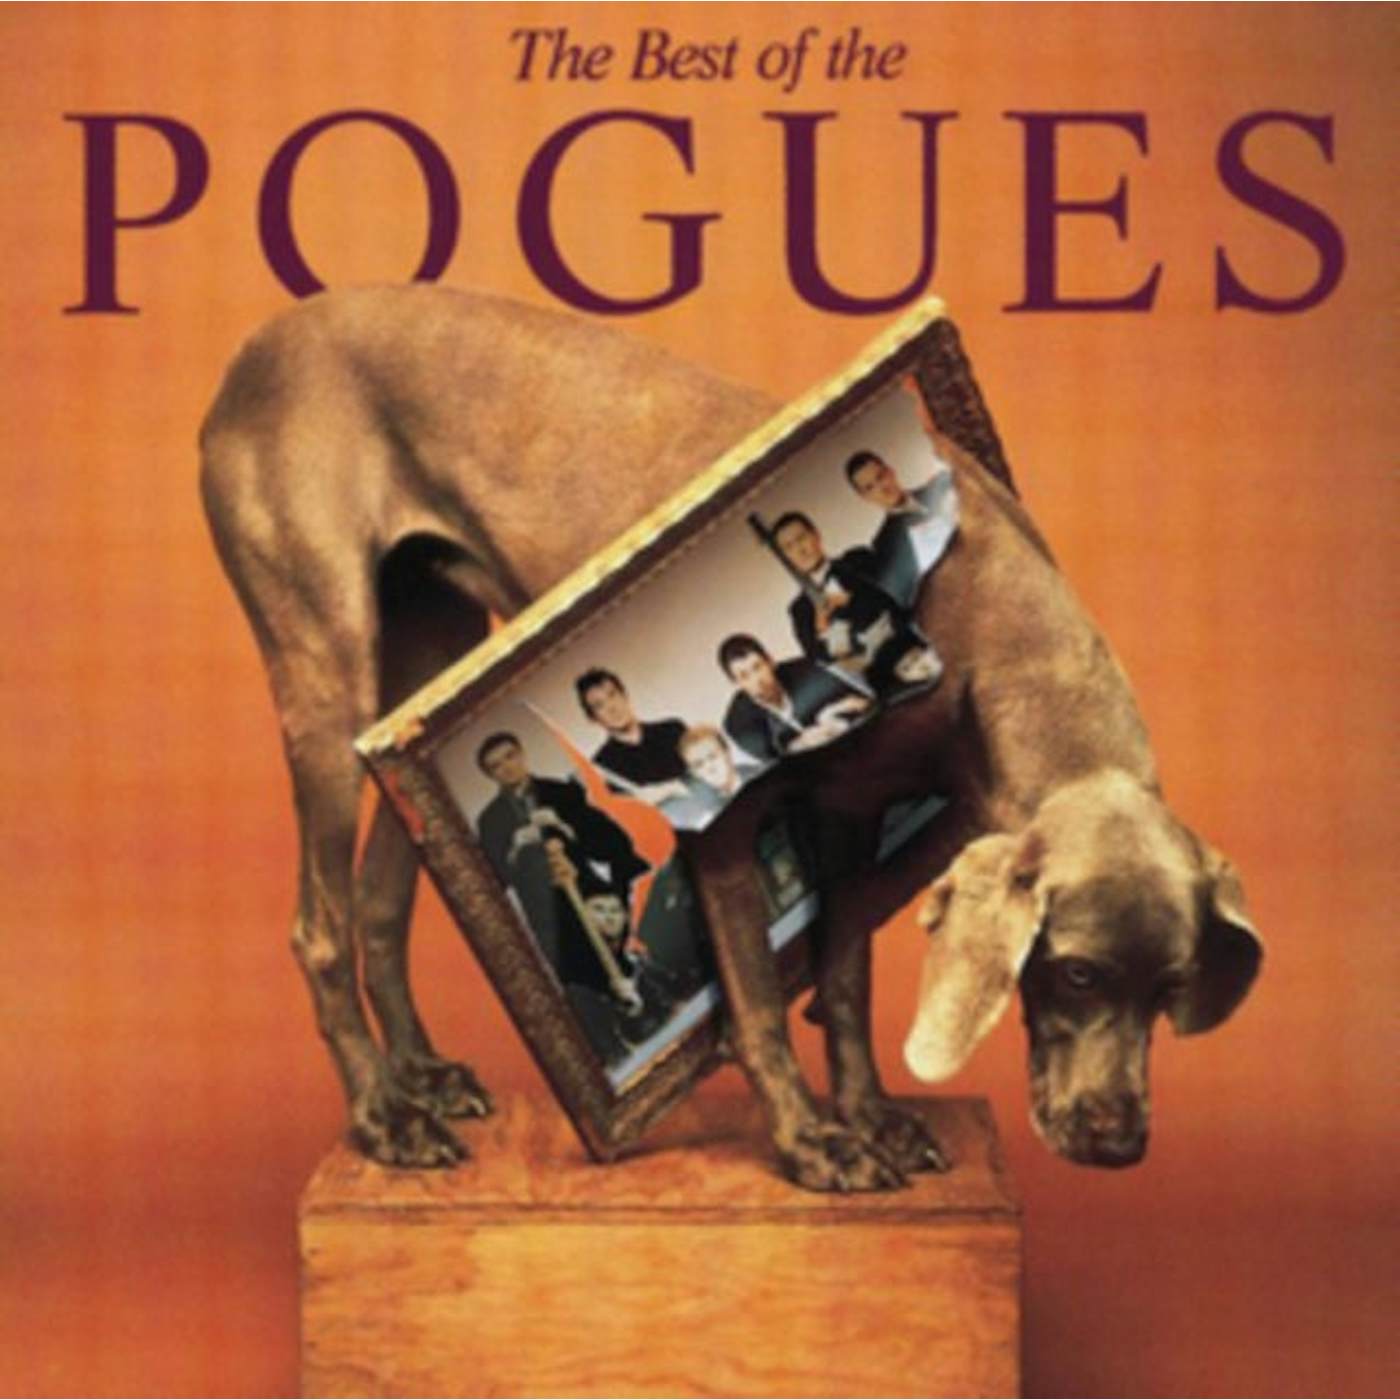 The Pogues CD - The Best Of